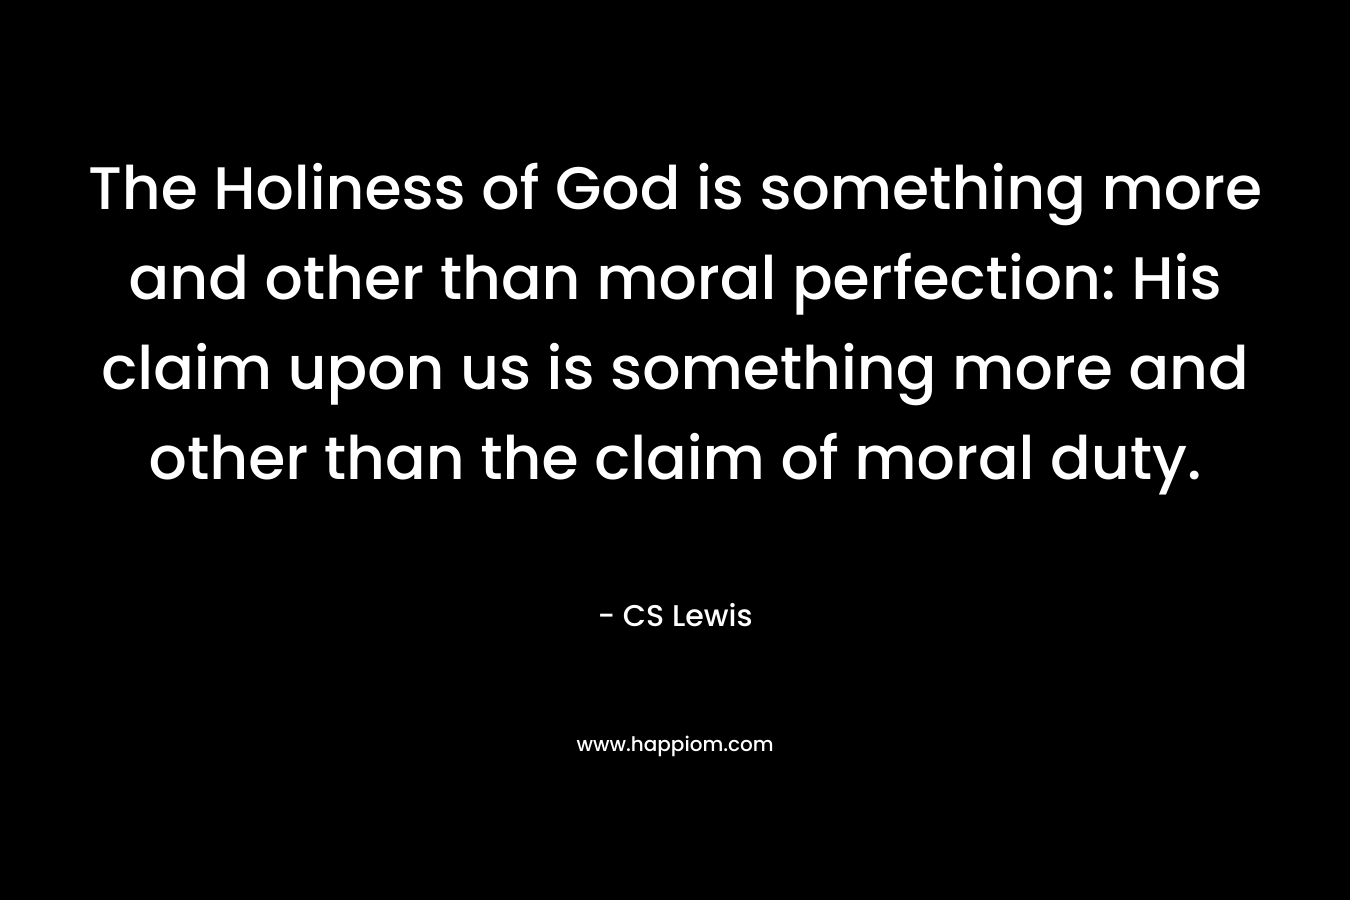 The Holiness of God is something more and other than moral perfection: His claim upon us is something more and other than the claim of moral duty.